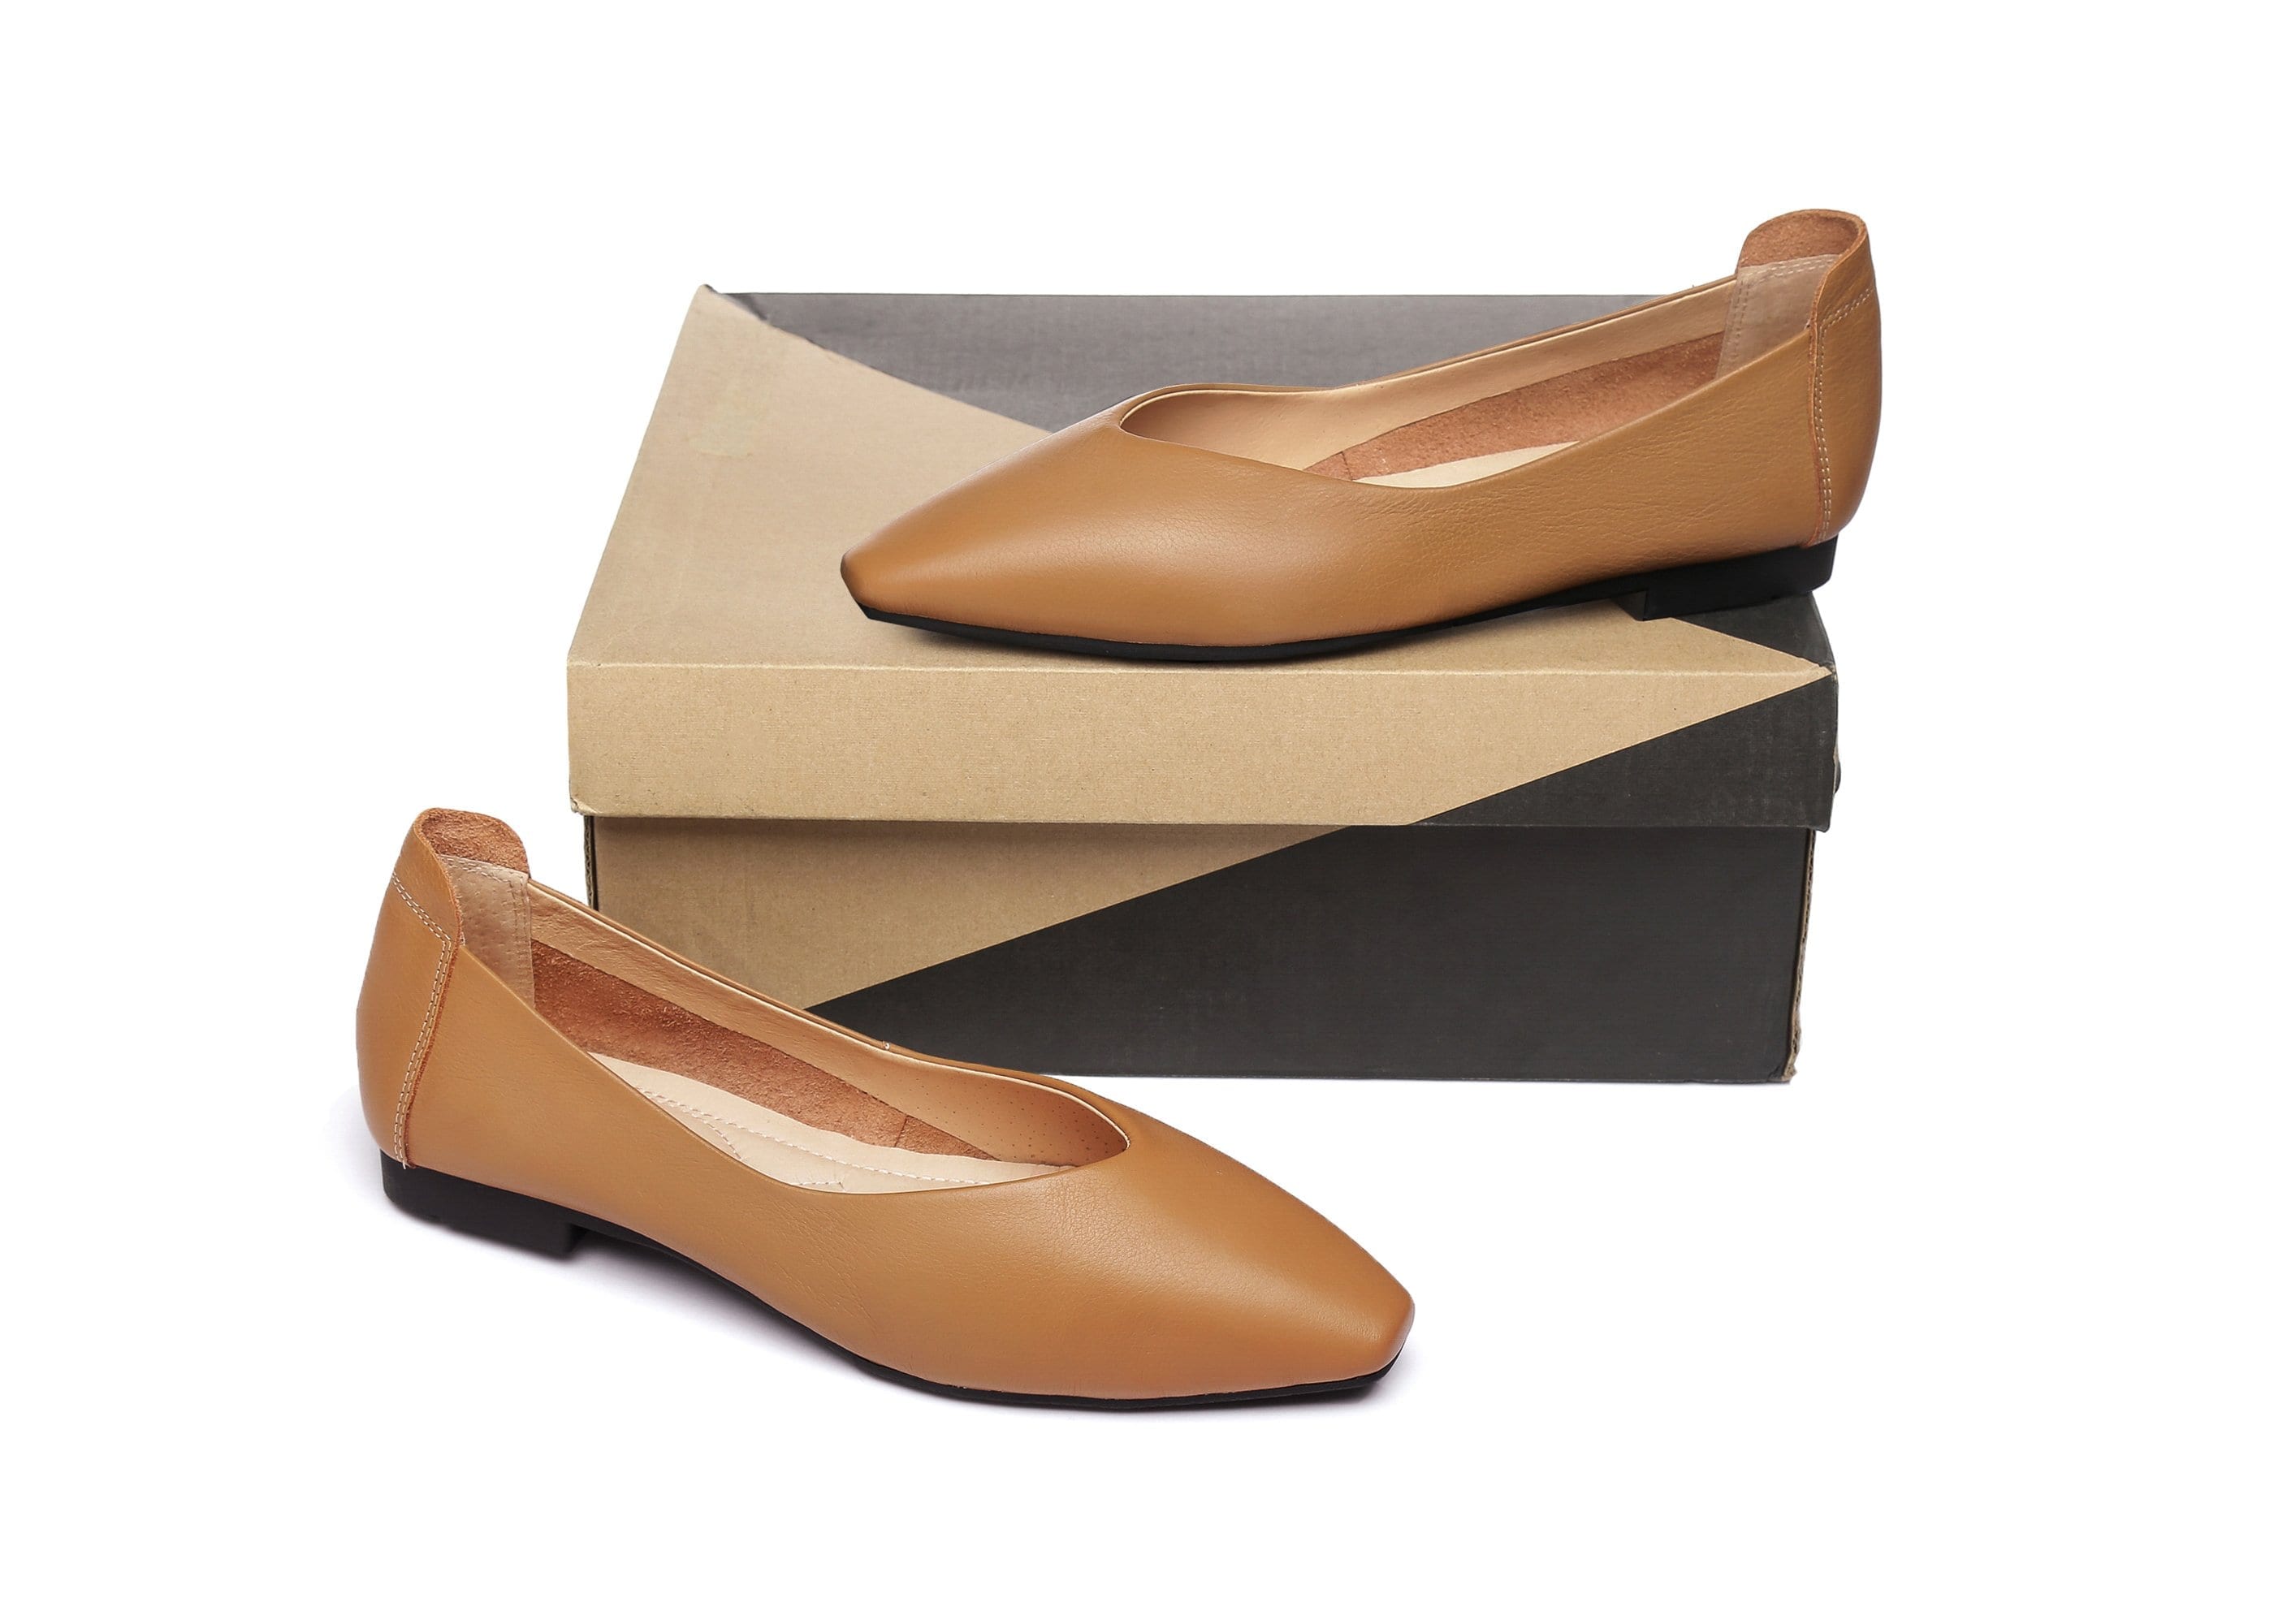 UGG Boots - Everly Leather Pointed Toe Ballet Flats